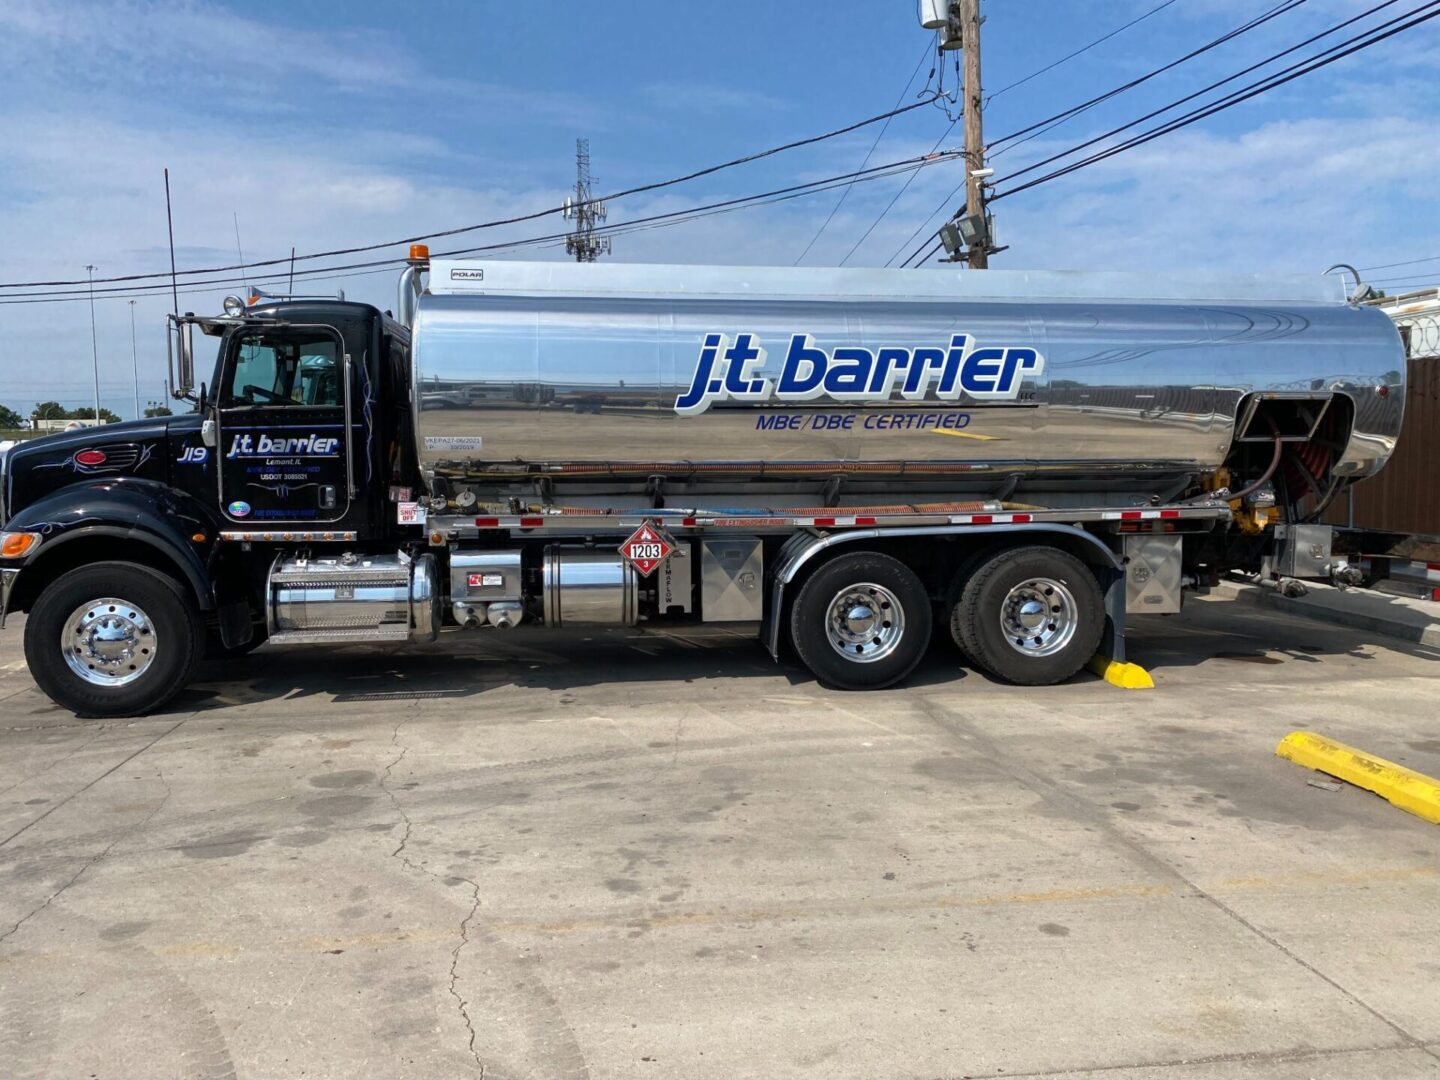 A silver tanker truck parked in a parking lot.